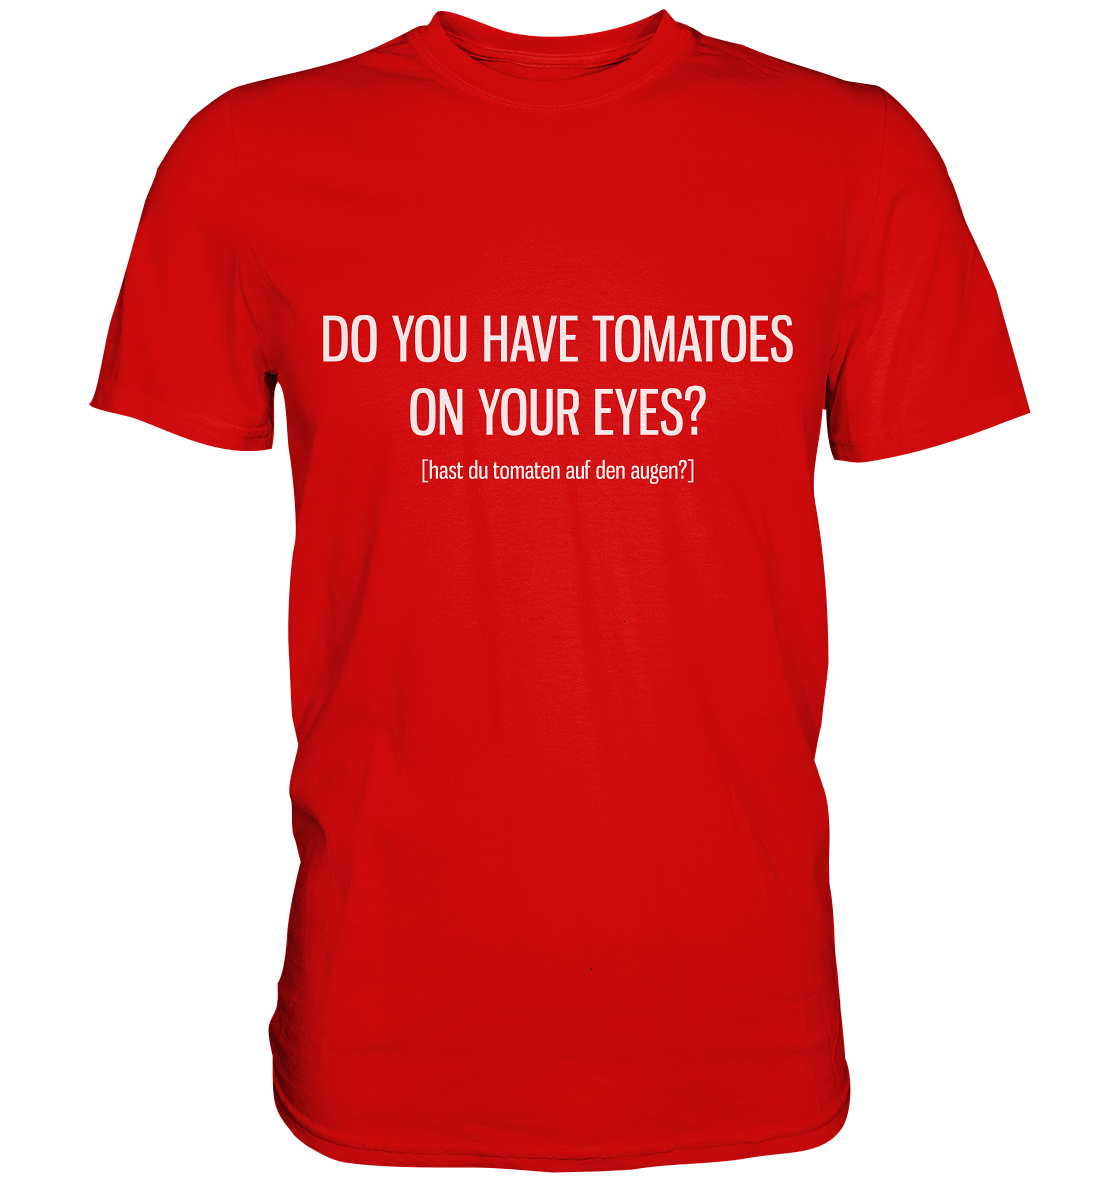 Do you have tomatoes on your eyes? Englisch - Unisex Premium Shirt